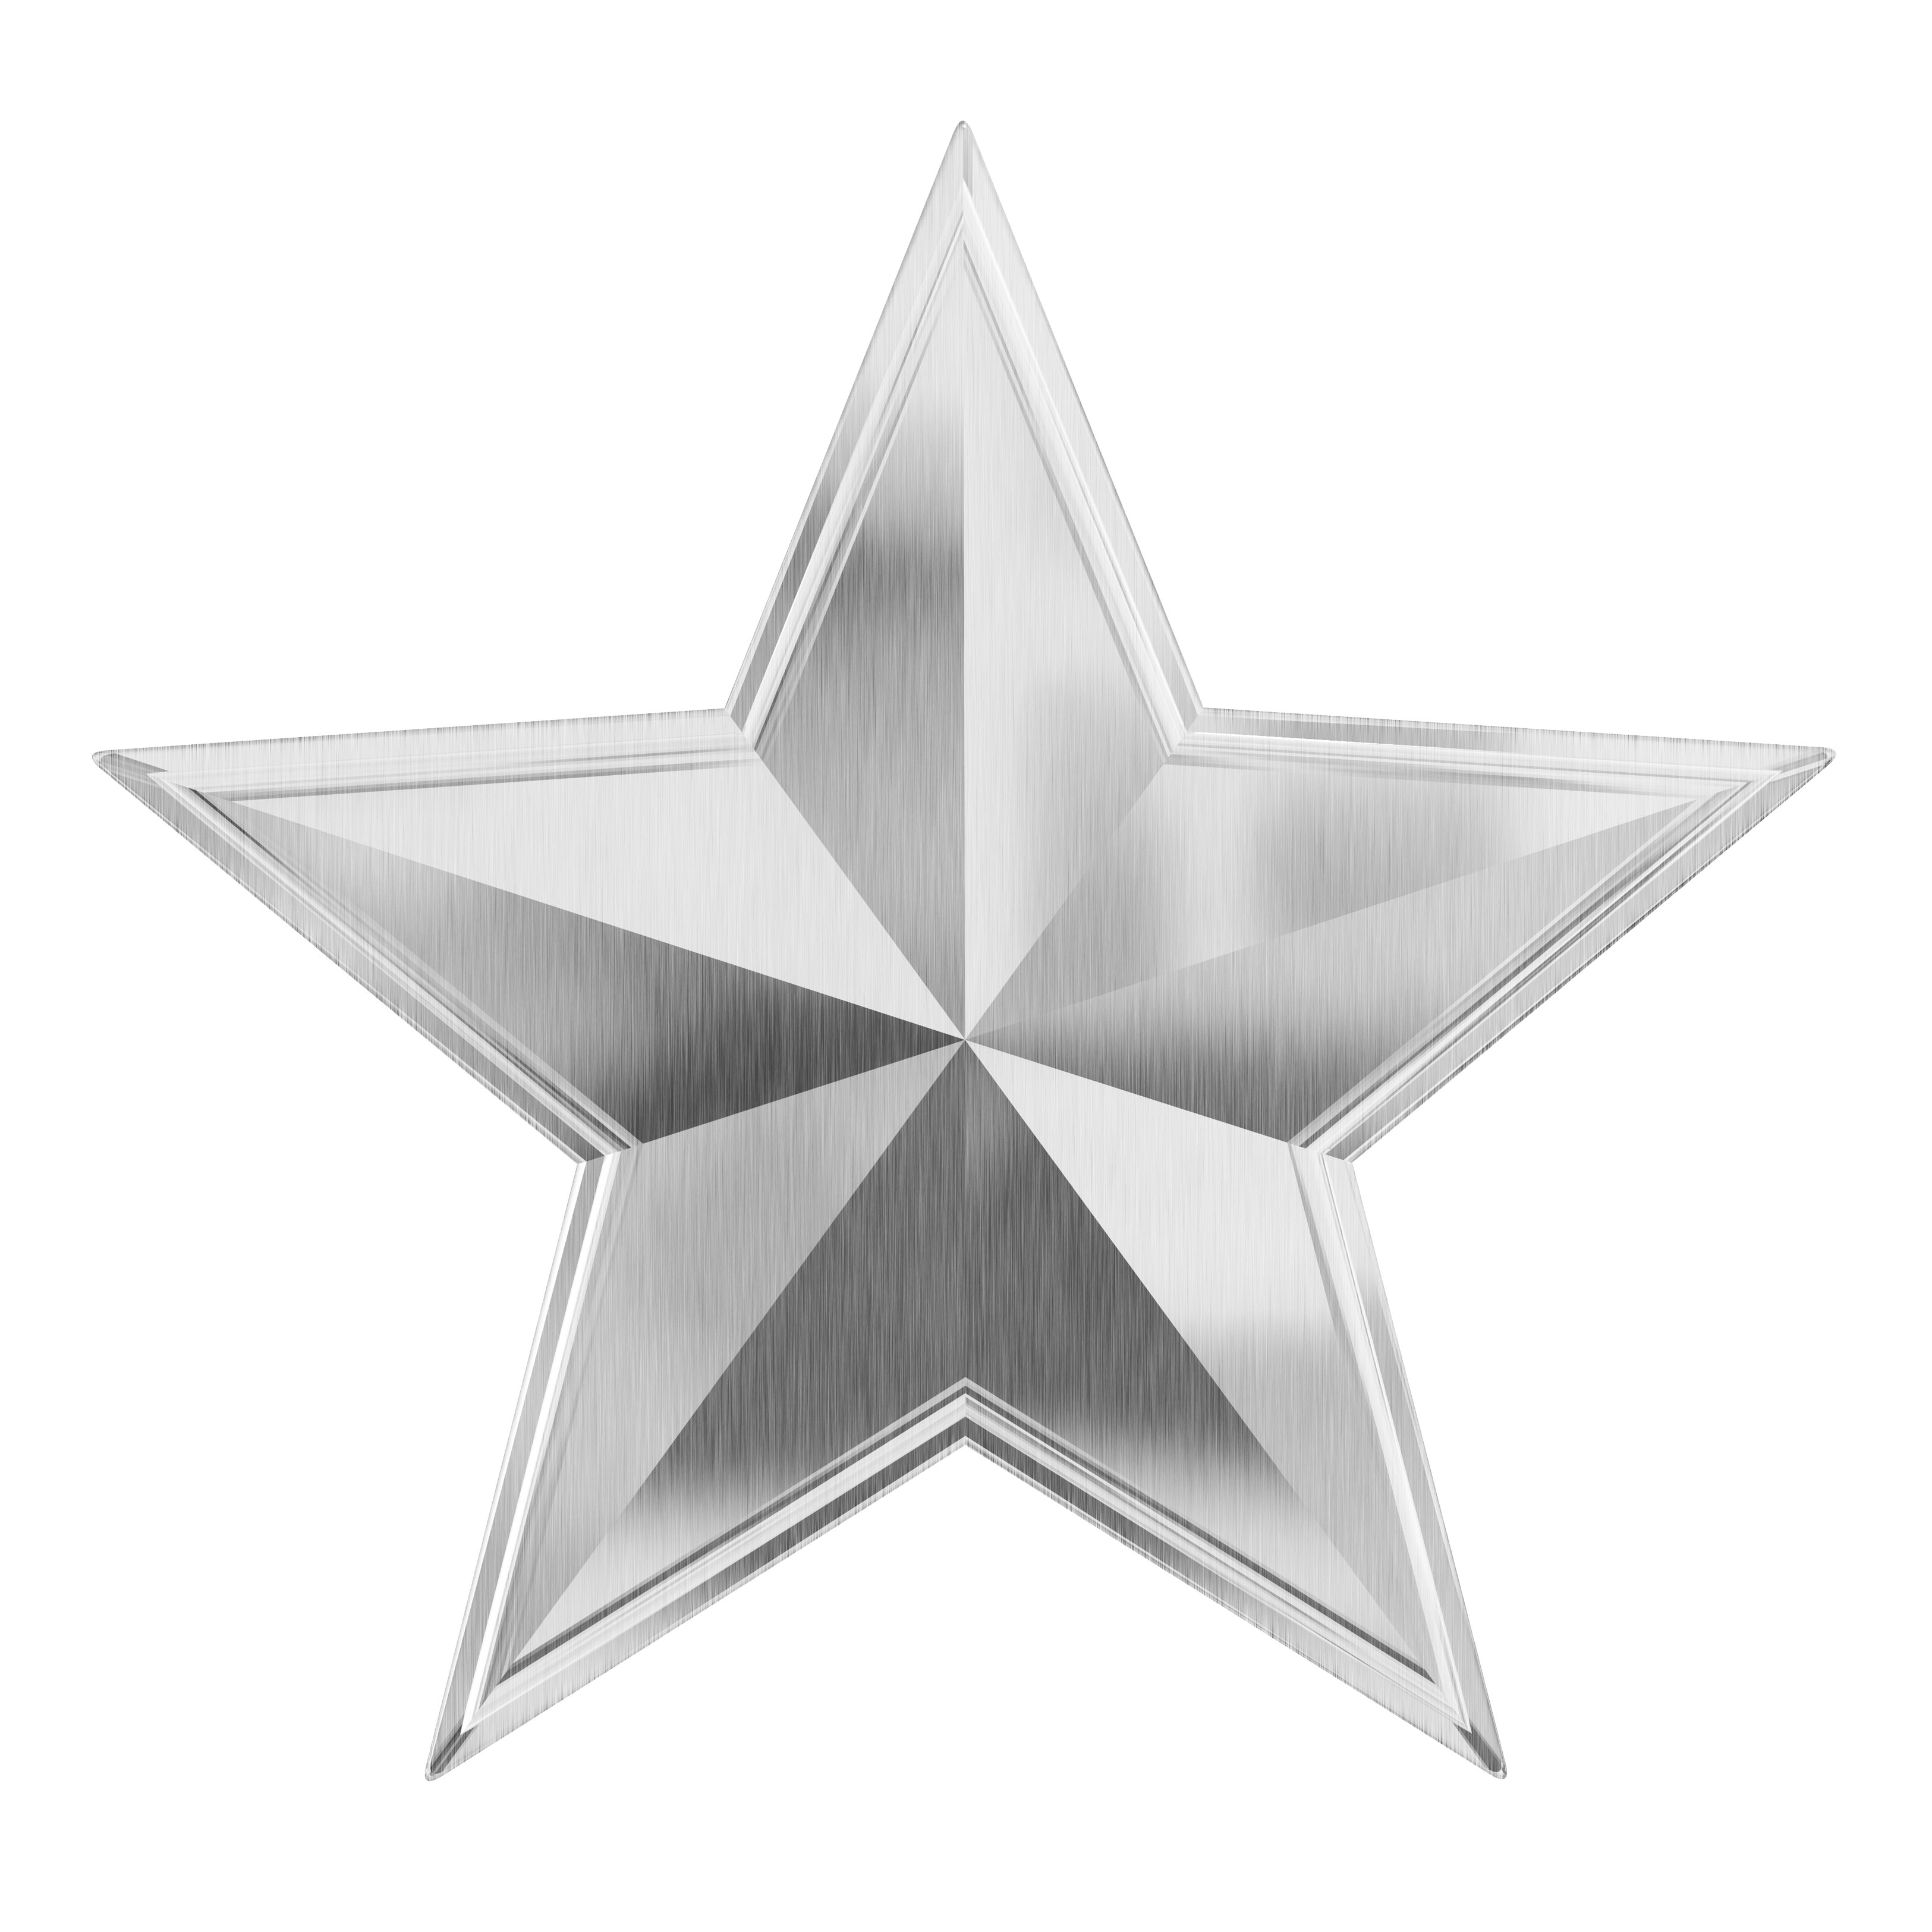 A Silver Star On A Black Background